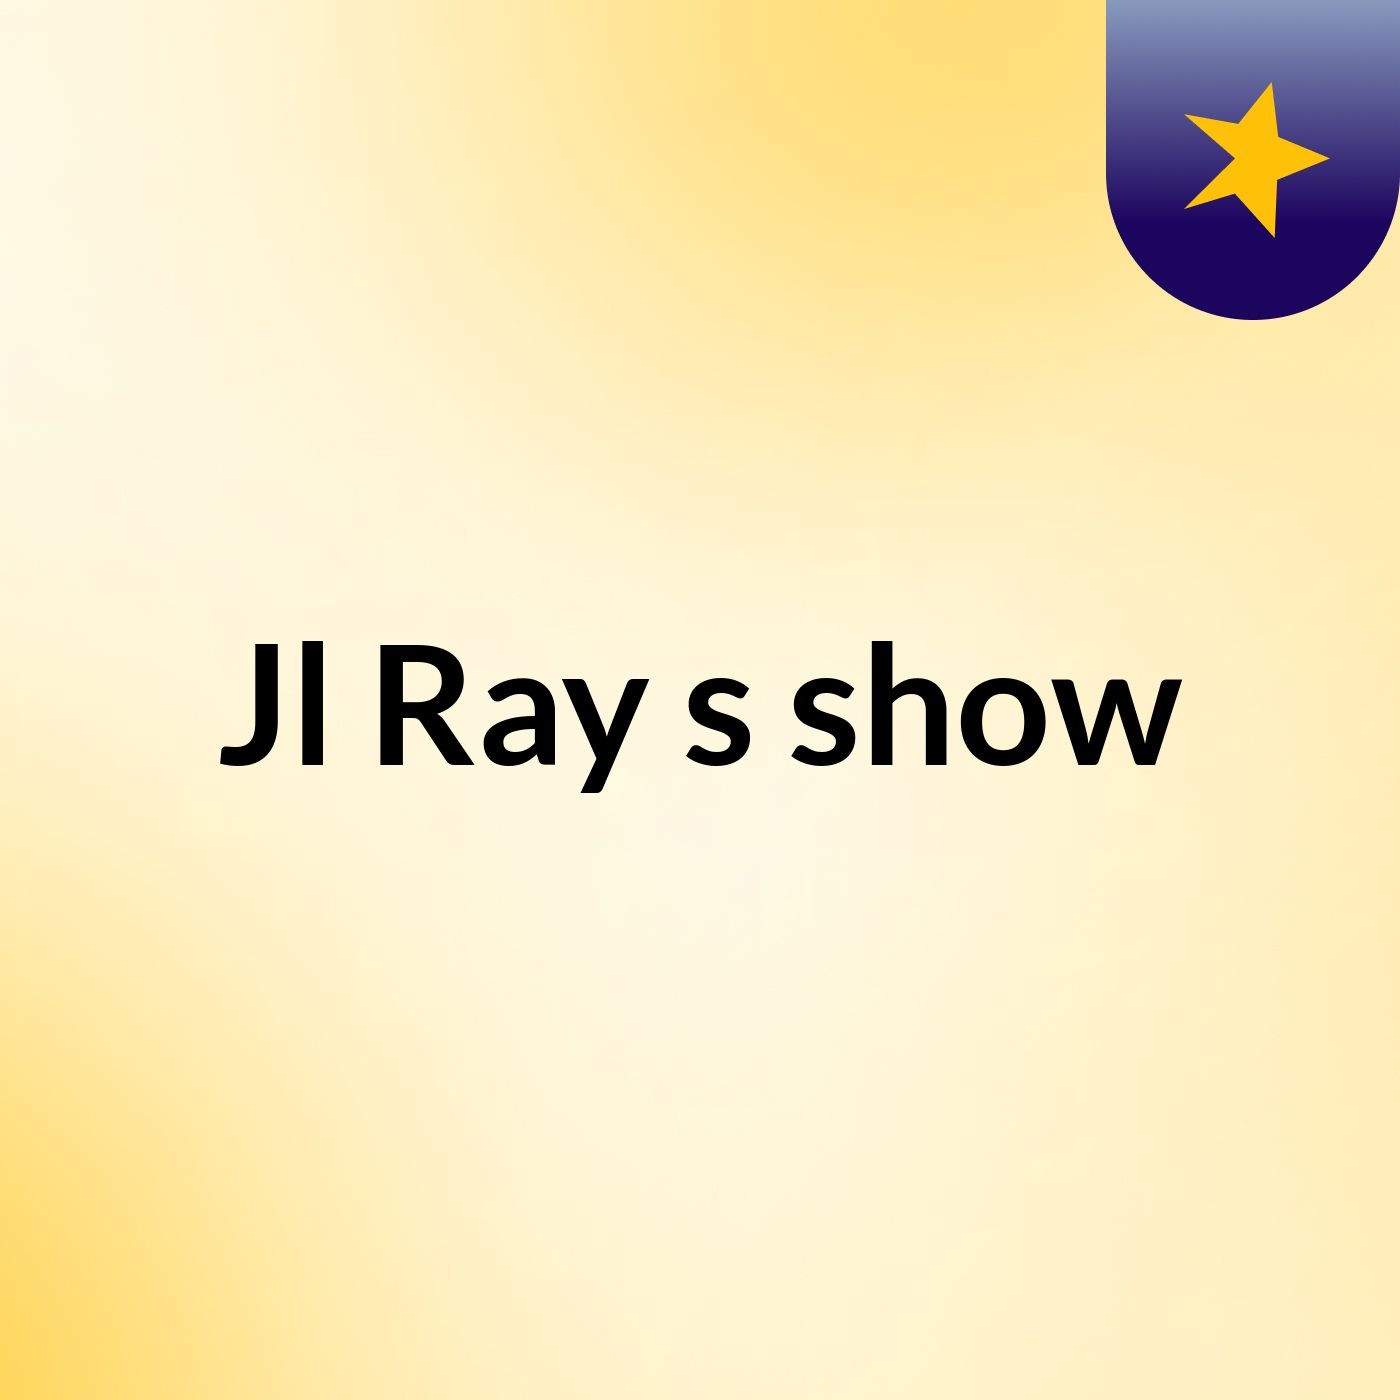 Jl Ray's show